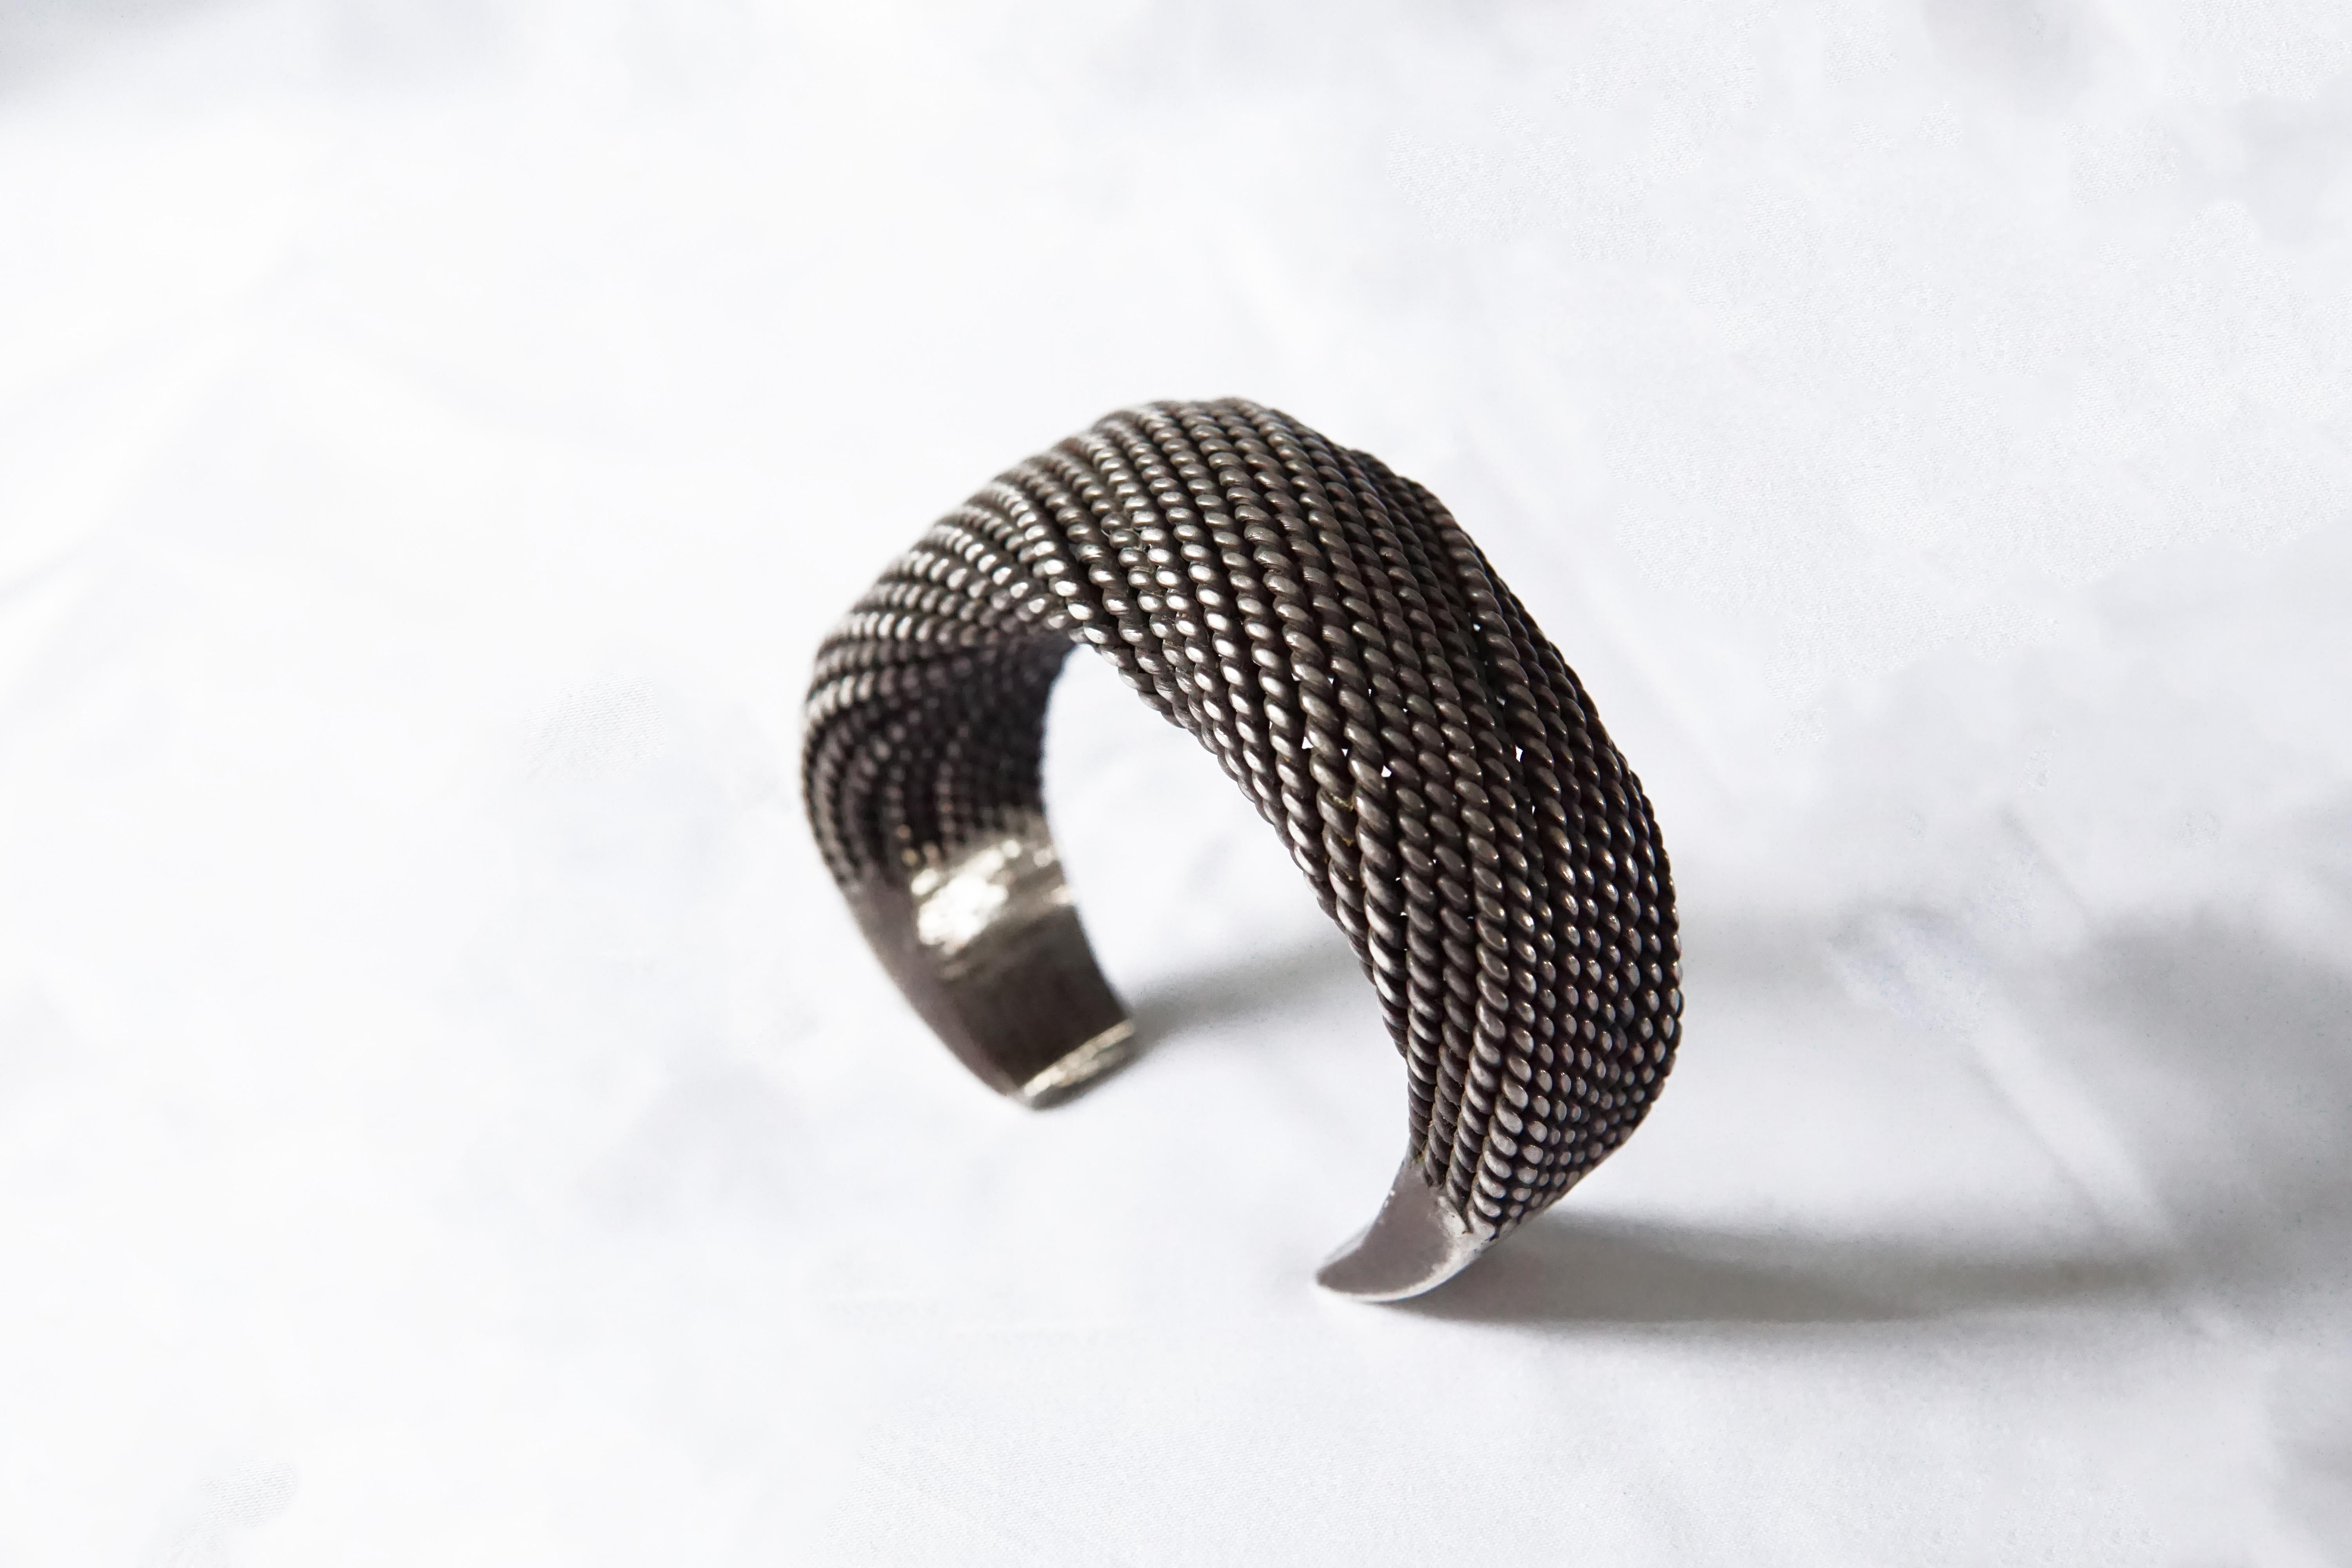 An Akha Tribe Woven Silver Bracelet with spiral design. This Tribal bracelet encompasses tradition Hill tribe silversmithing techniques with each silver strand crafted and woven by hand. This bracelet is slightly adjustable to fit different wrist